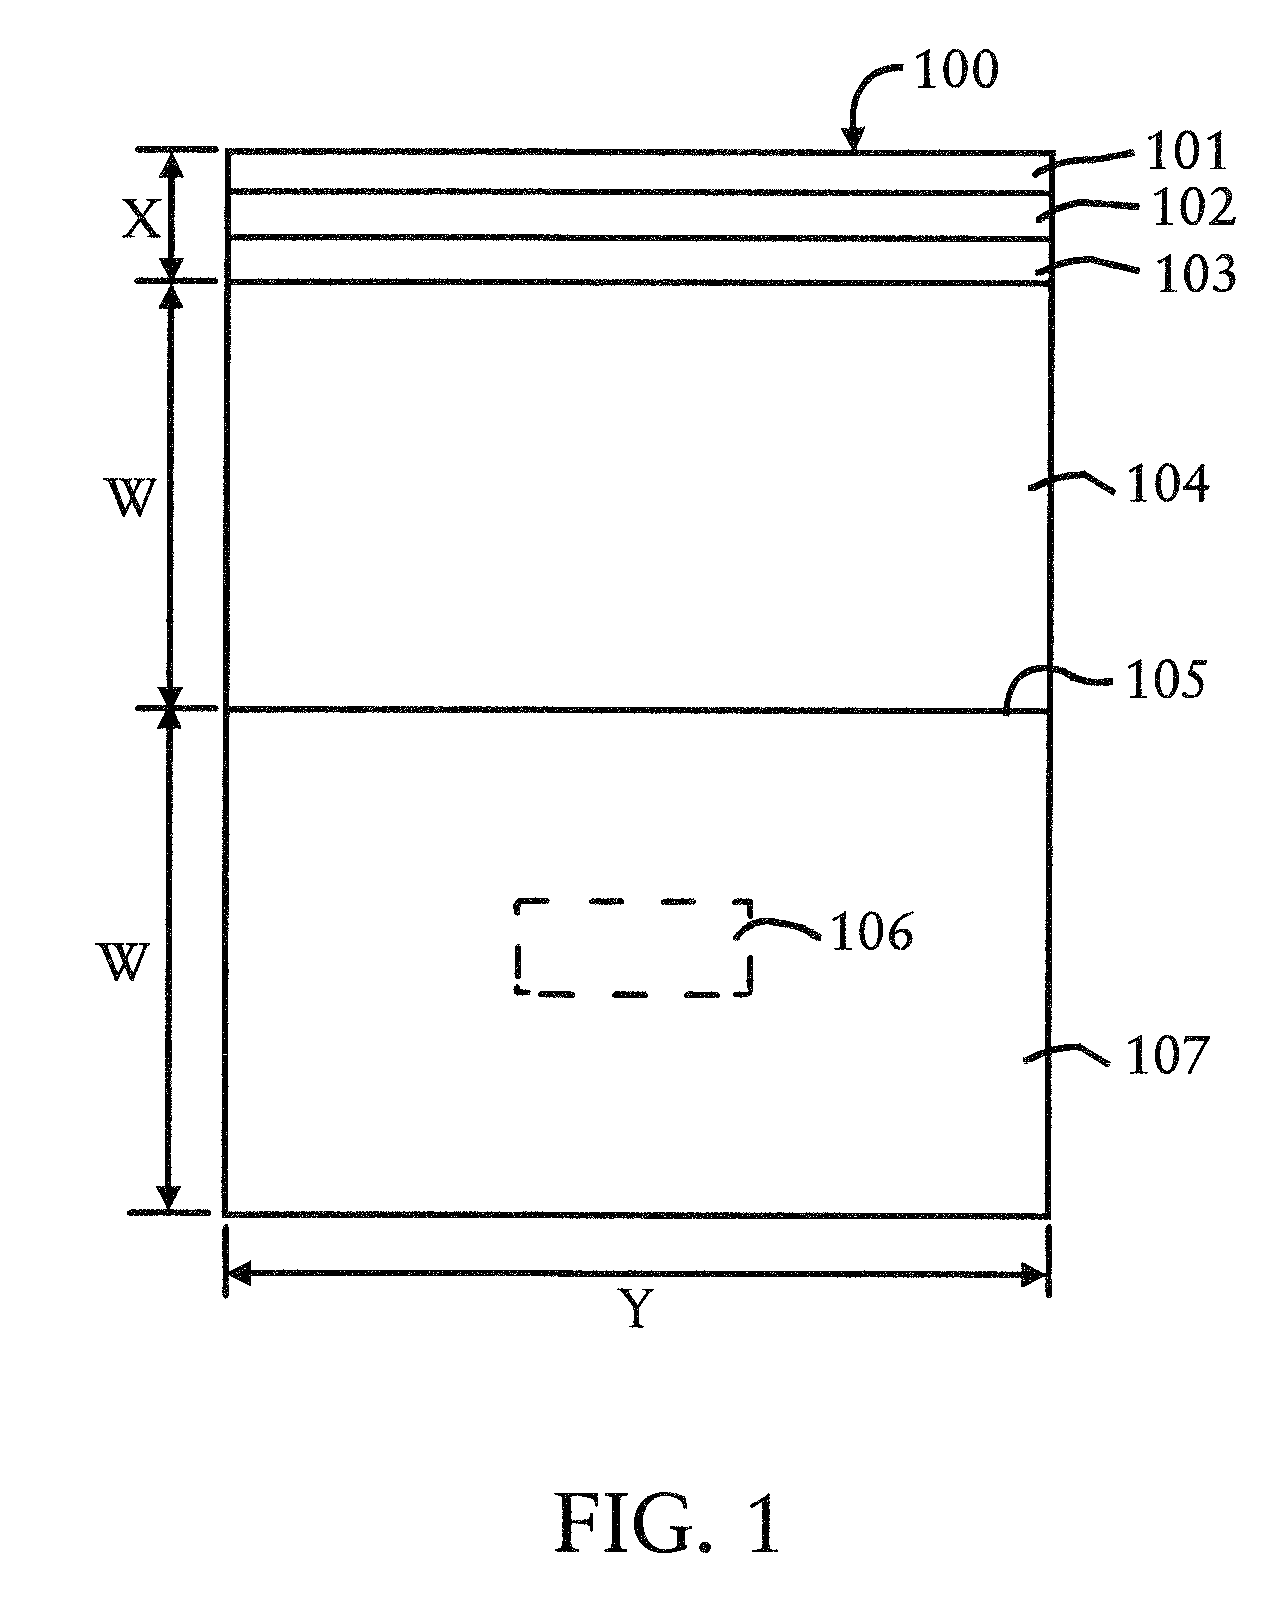 Method of packaging financial transaction instruments, particularly stored value cards